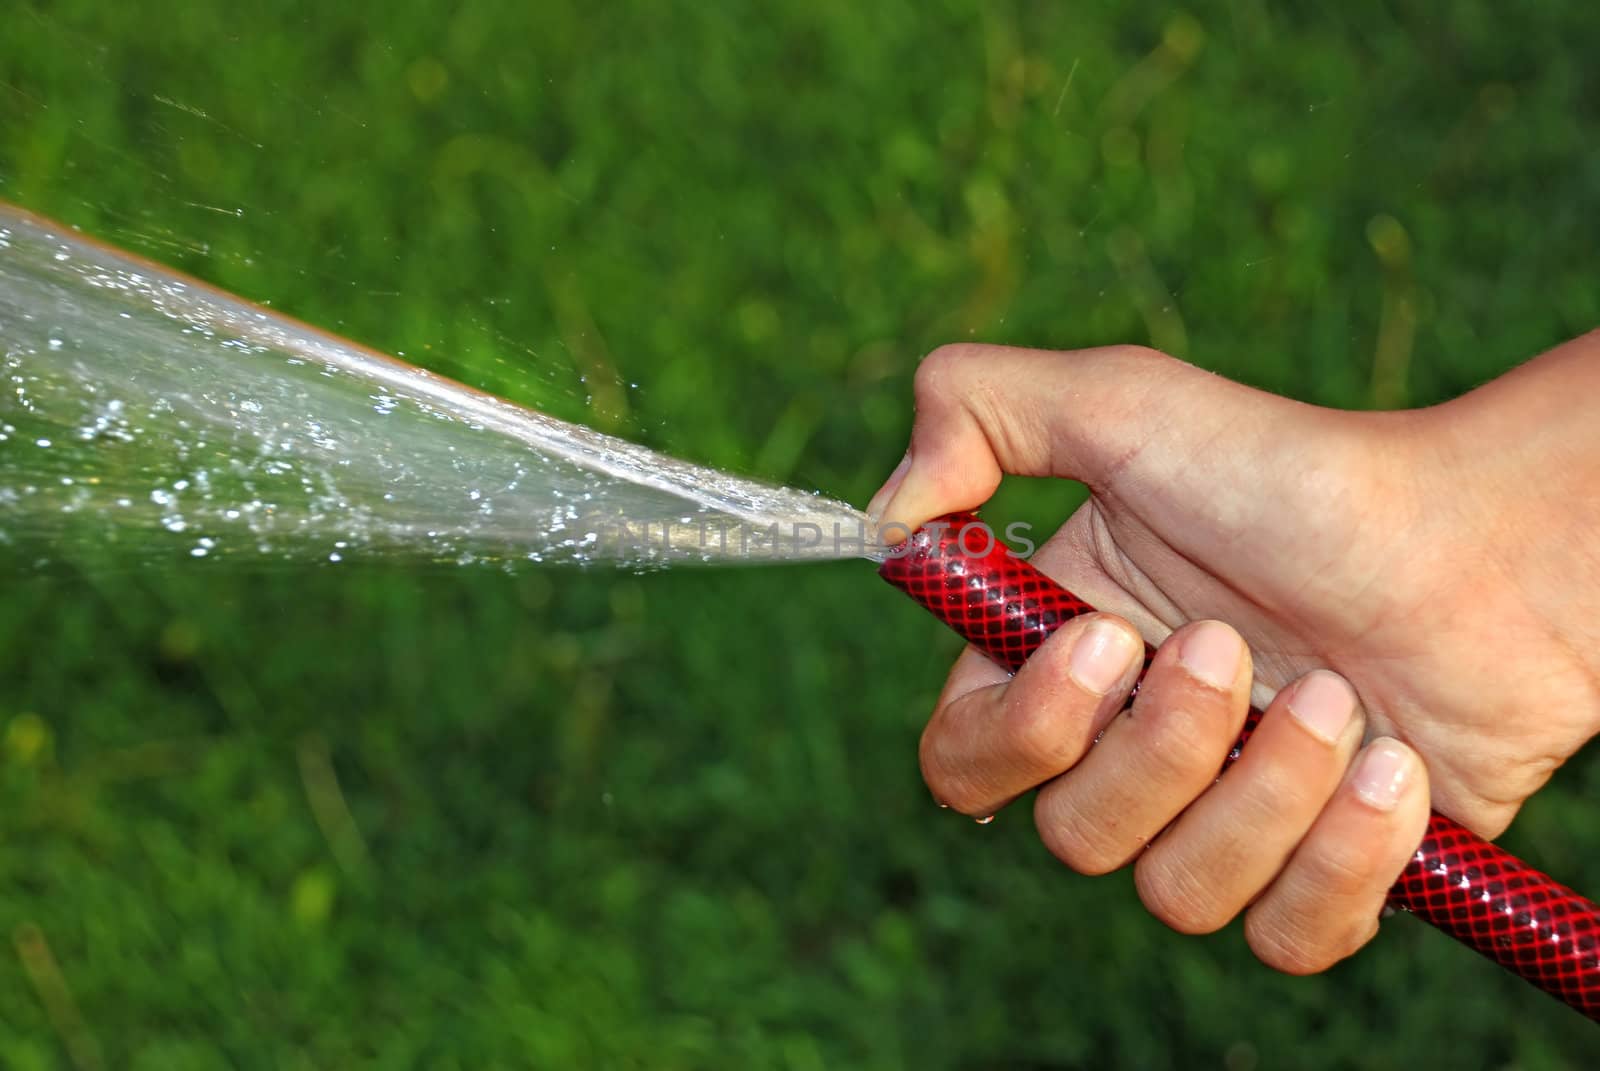 Watering grass by simply